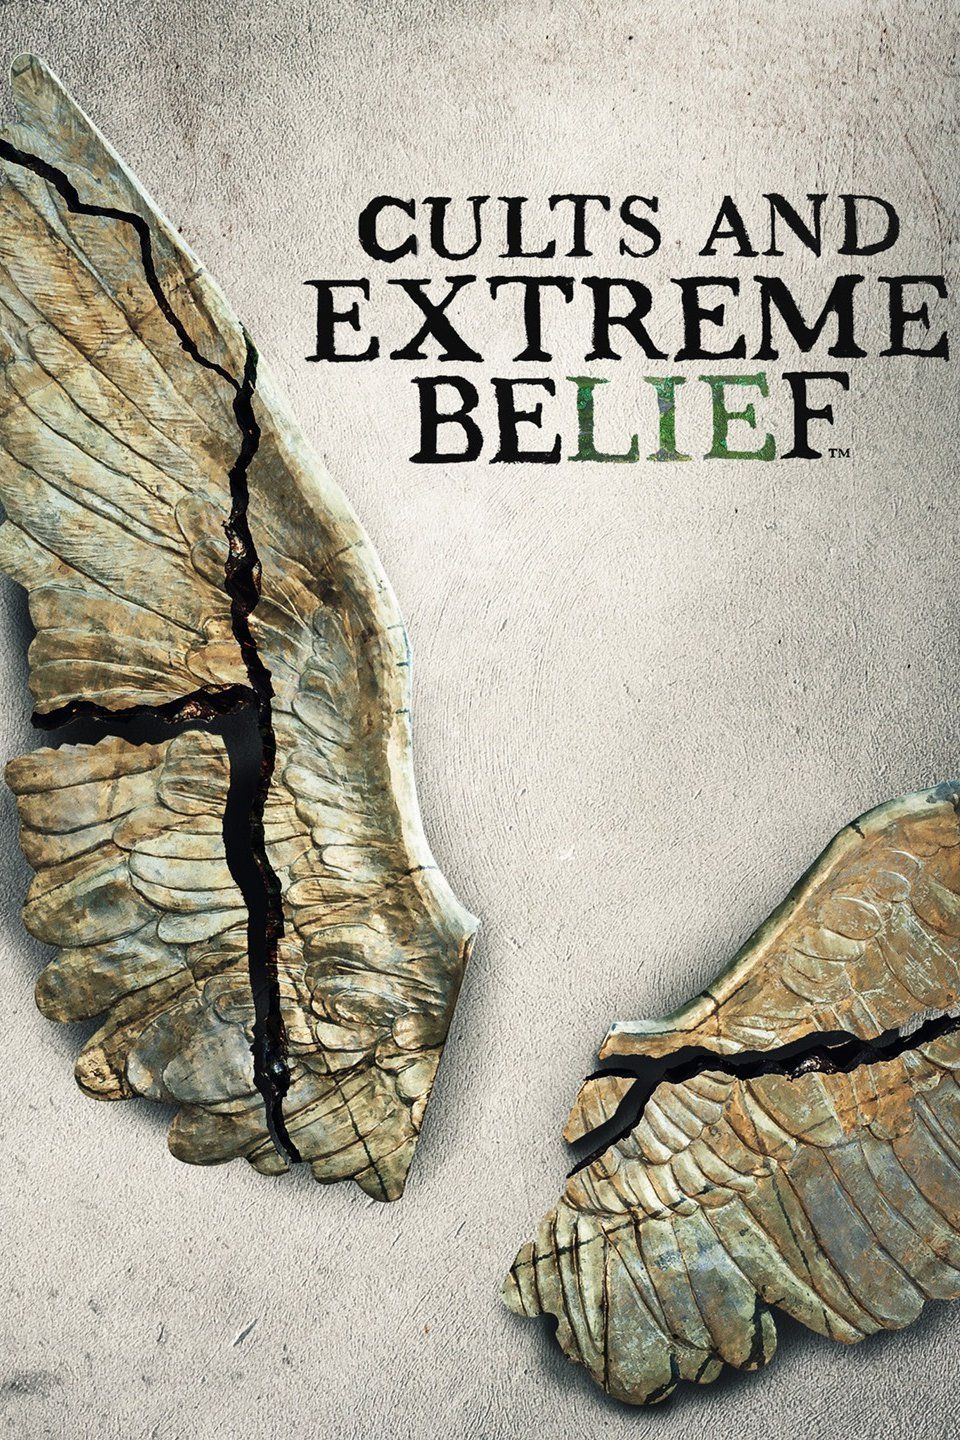 Cults and Extreme Belief ne zaman